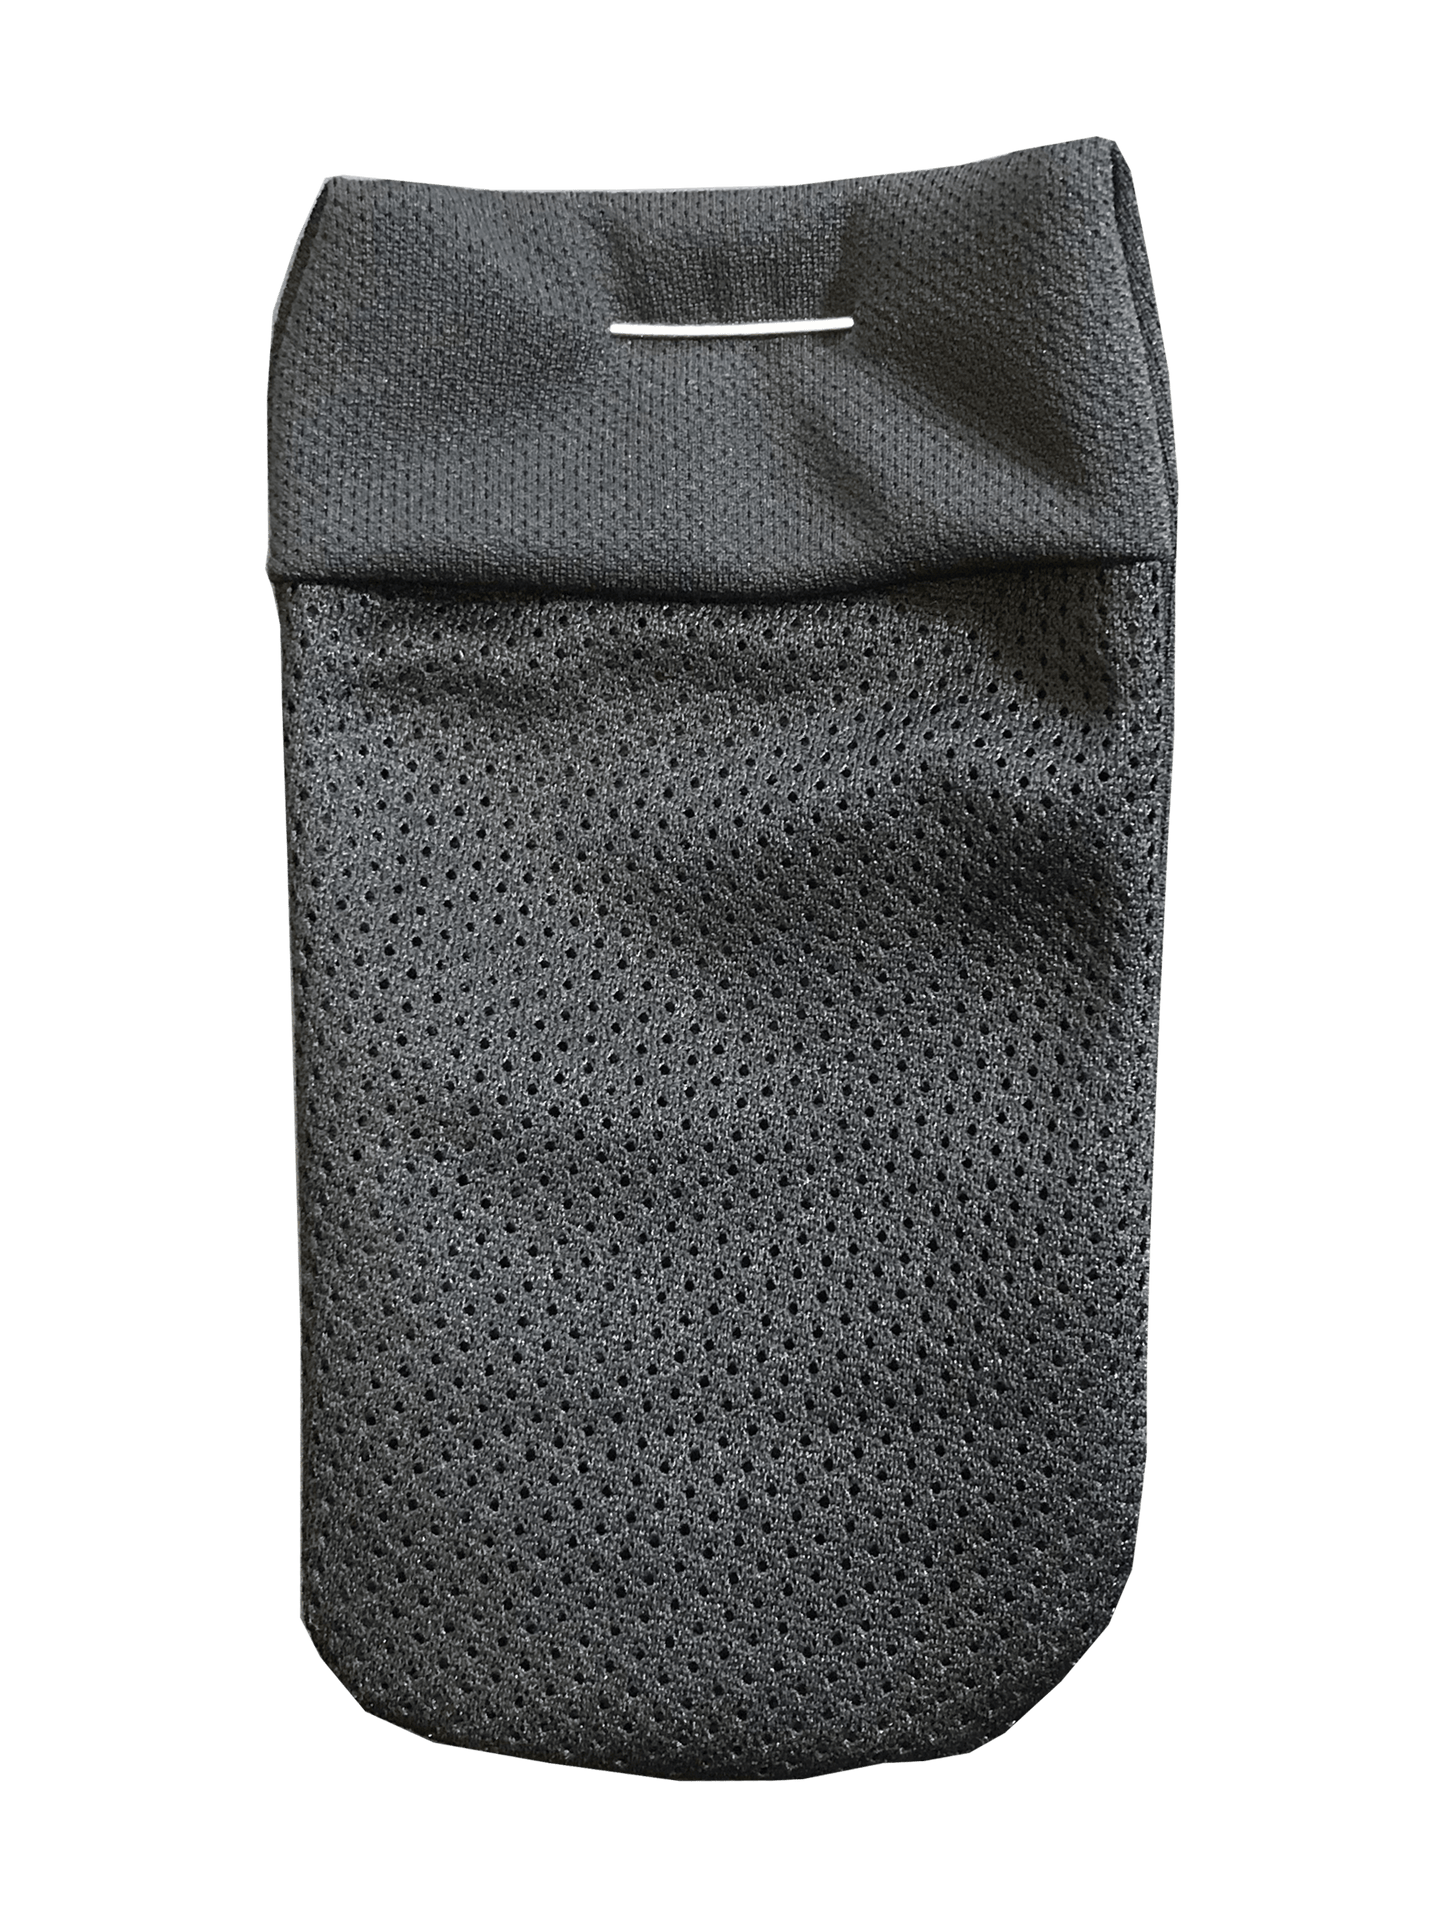 Joey Packer Pouch: Small